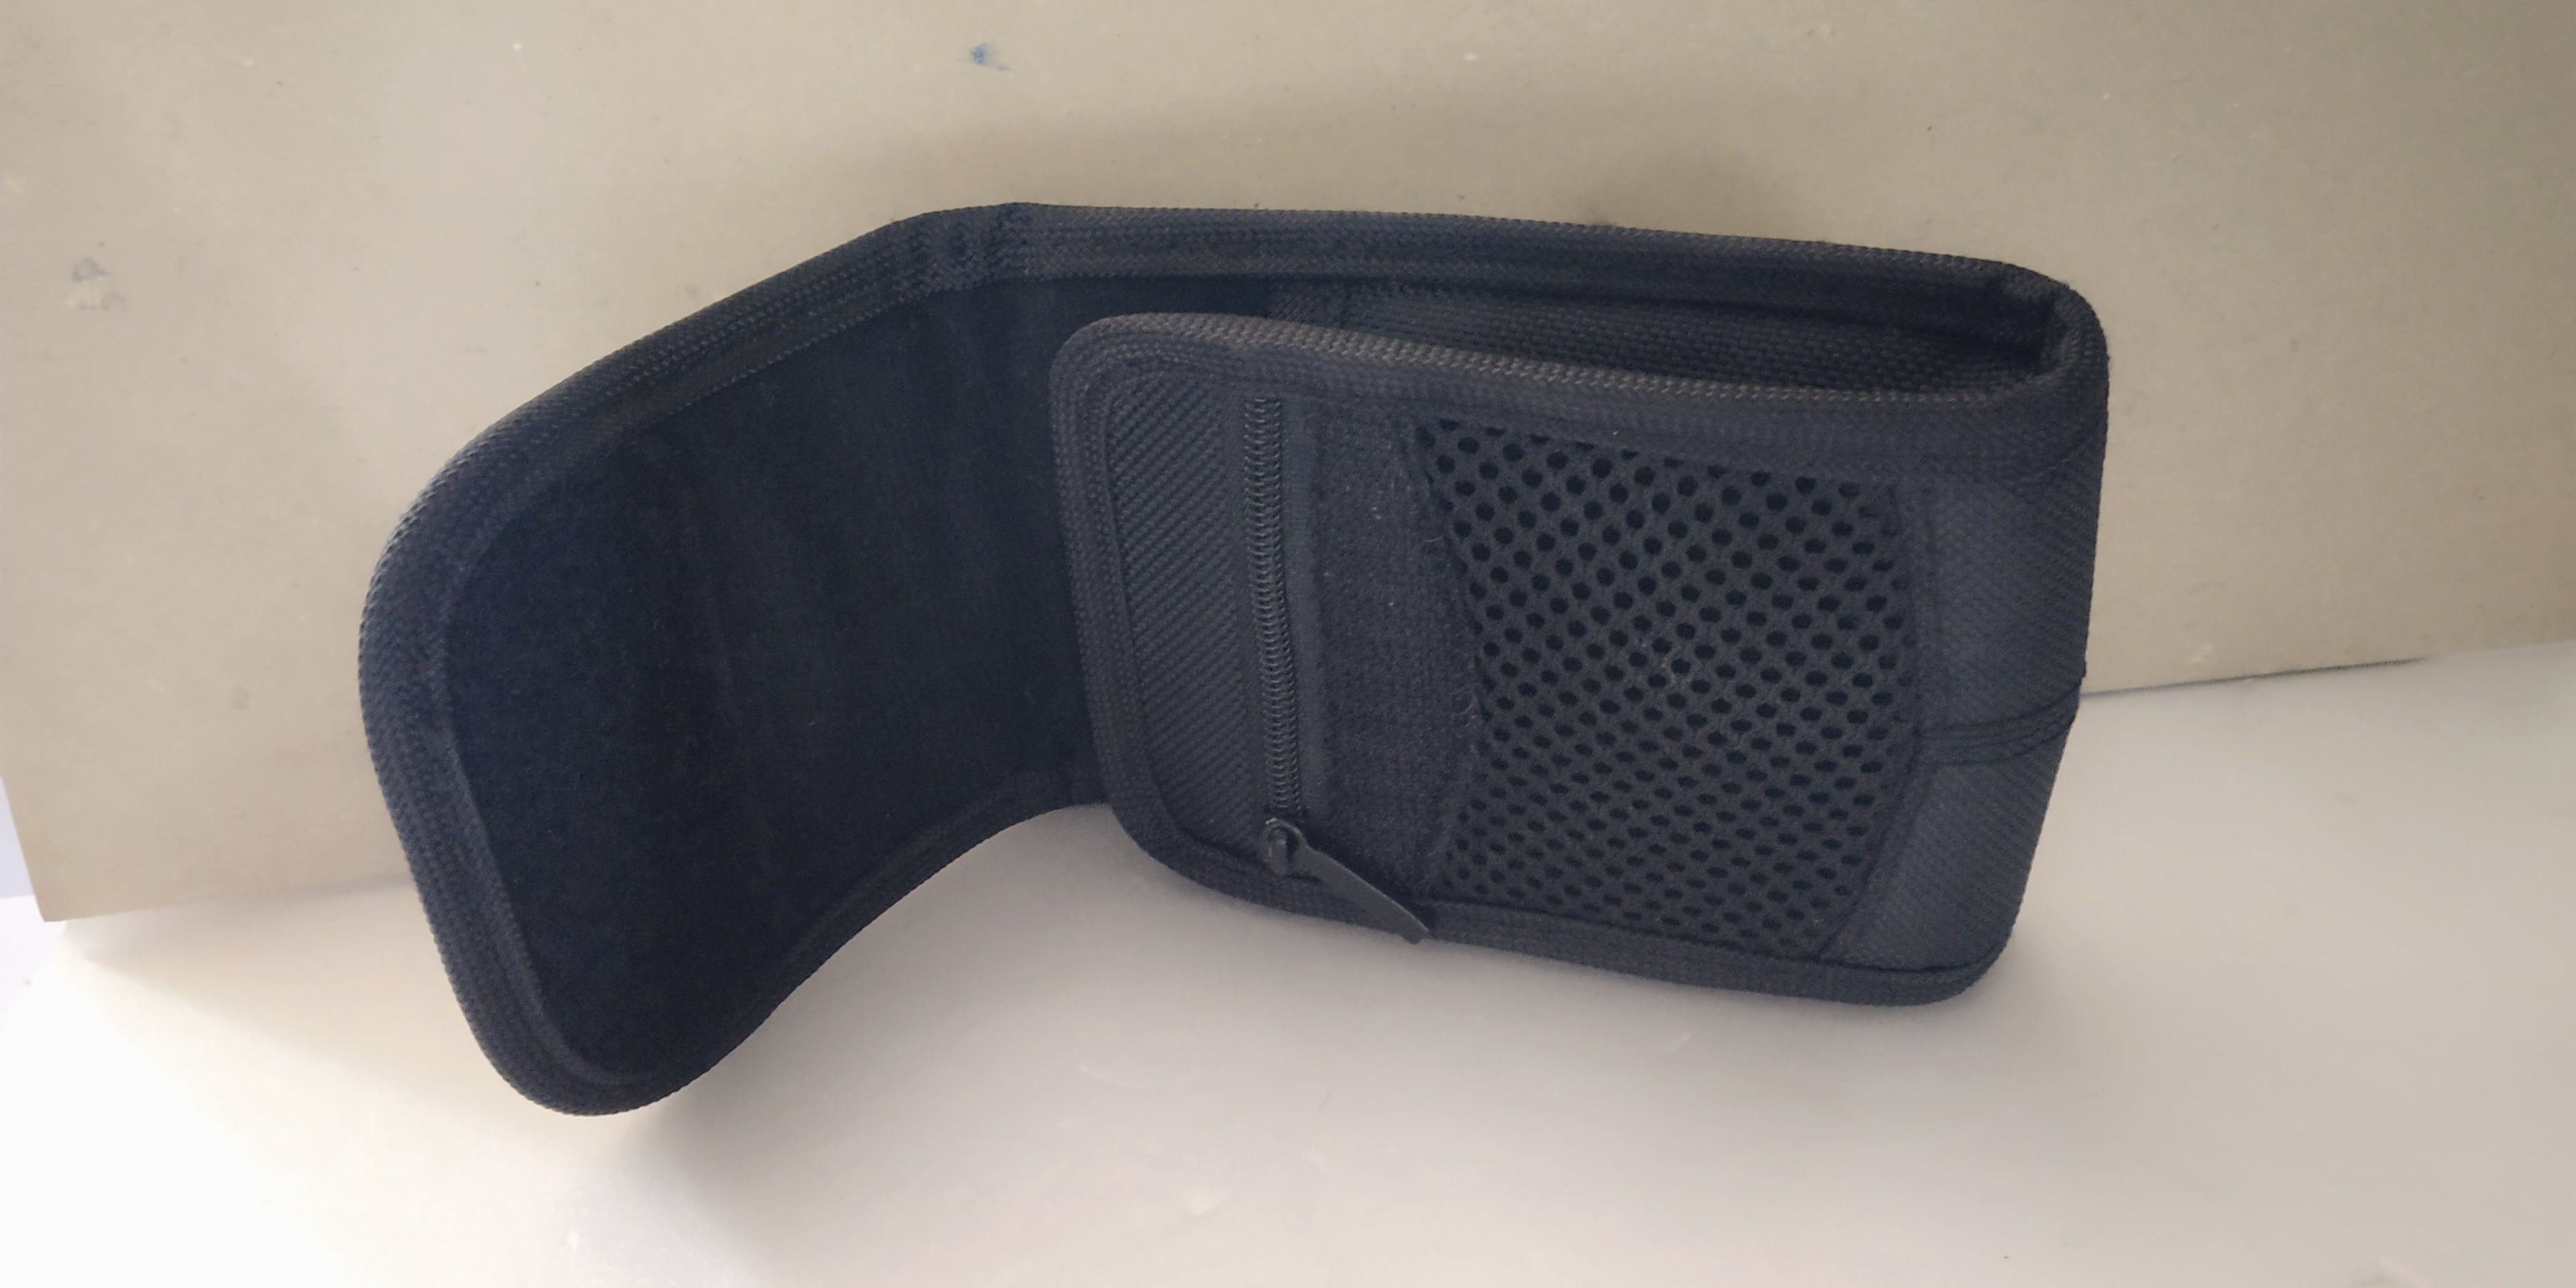 SONY MOBILE POUCH